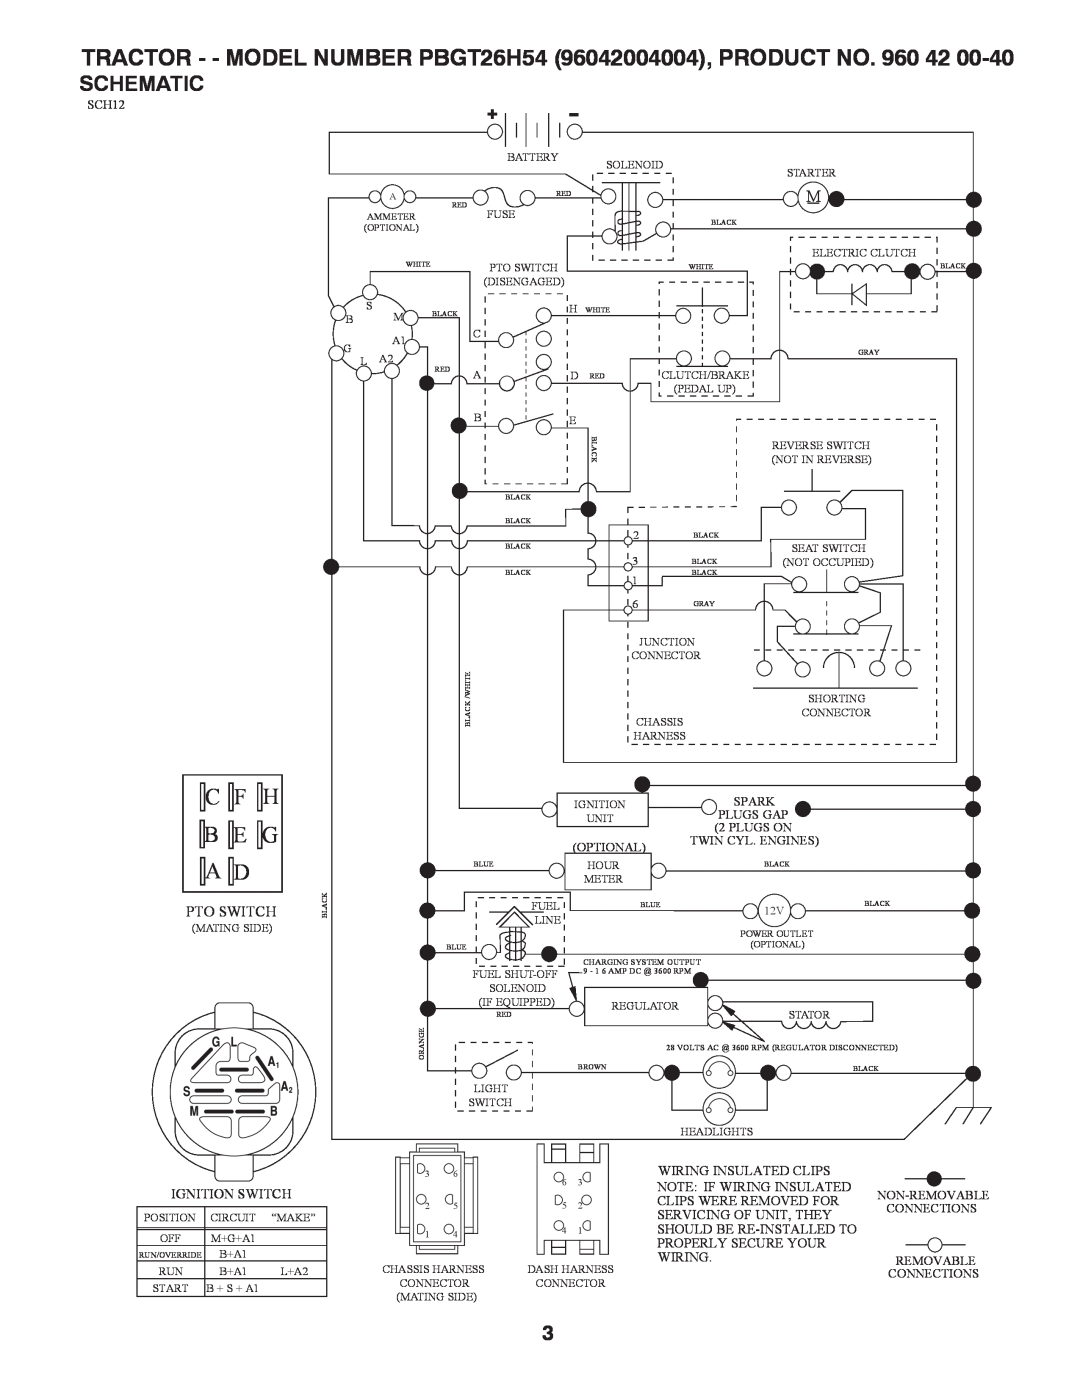 Poulan manual Schematic, TRACTOR - - MODEL NUMBER PBGT26H54 96042004004, PRODUCT NO. 960 42, C F H B E G A D, Pto Switch 